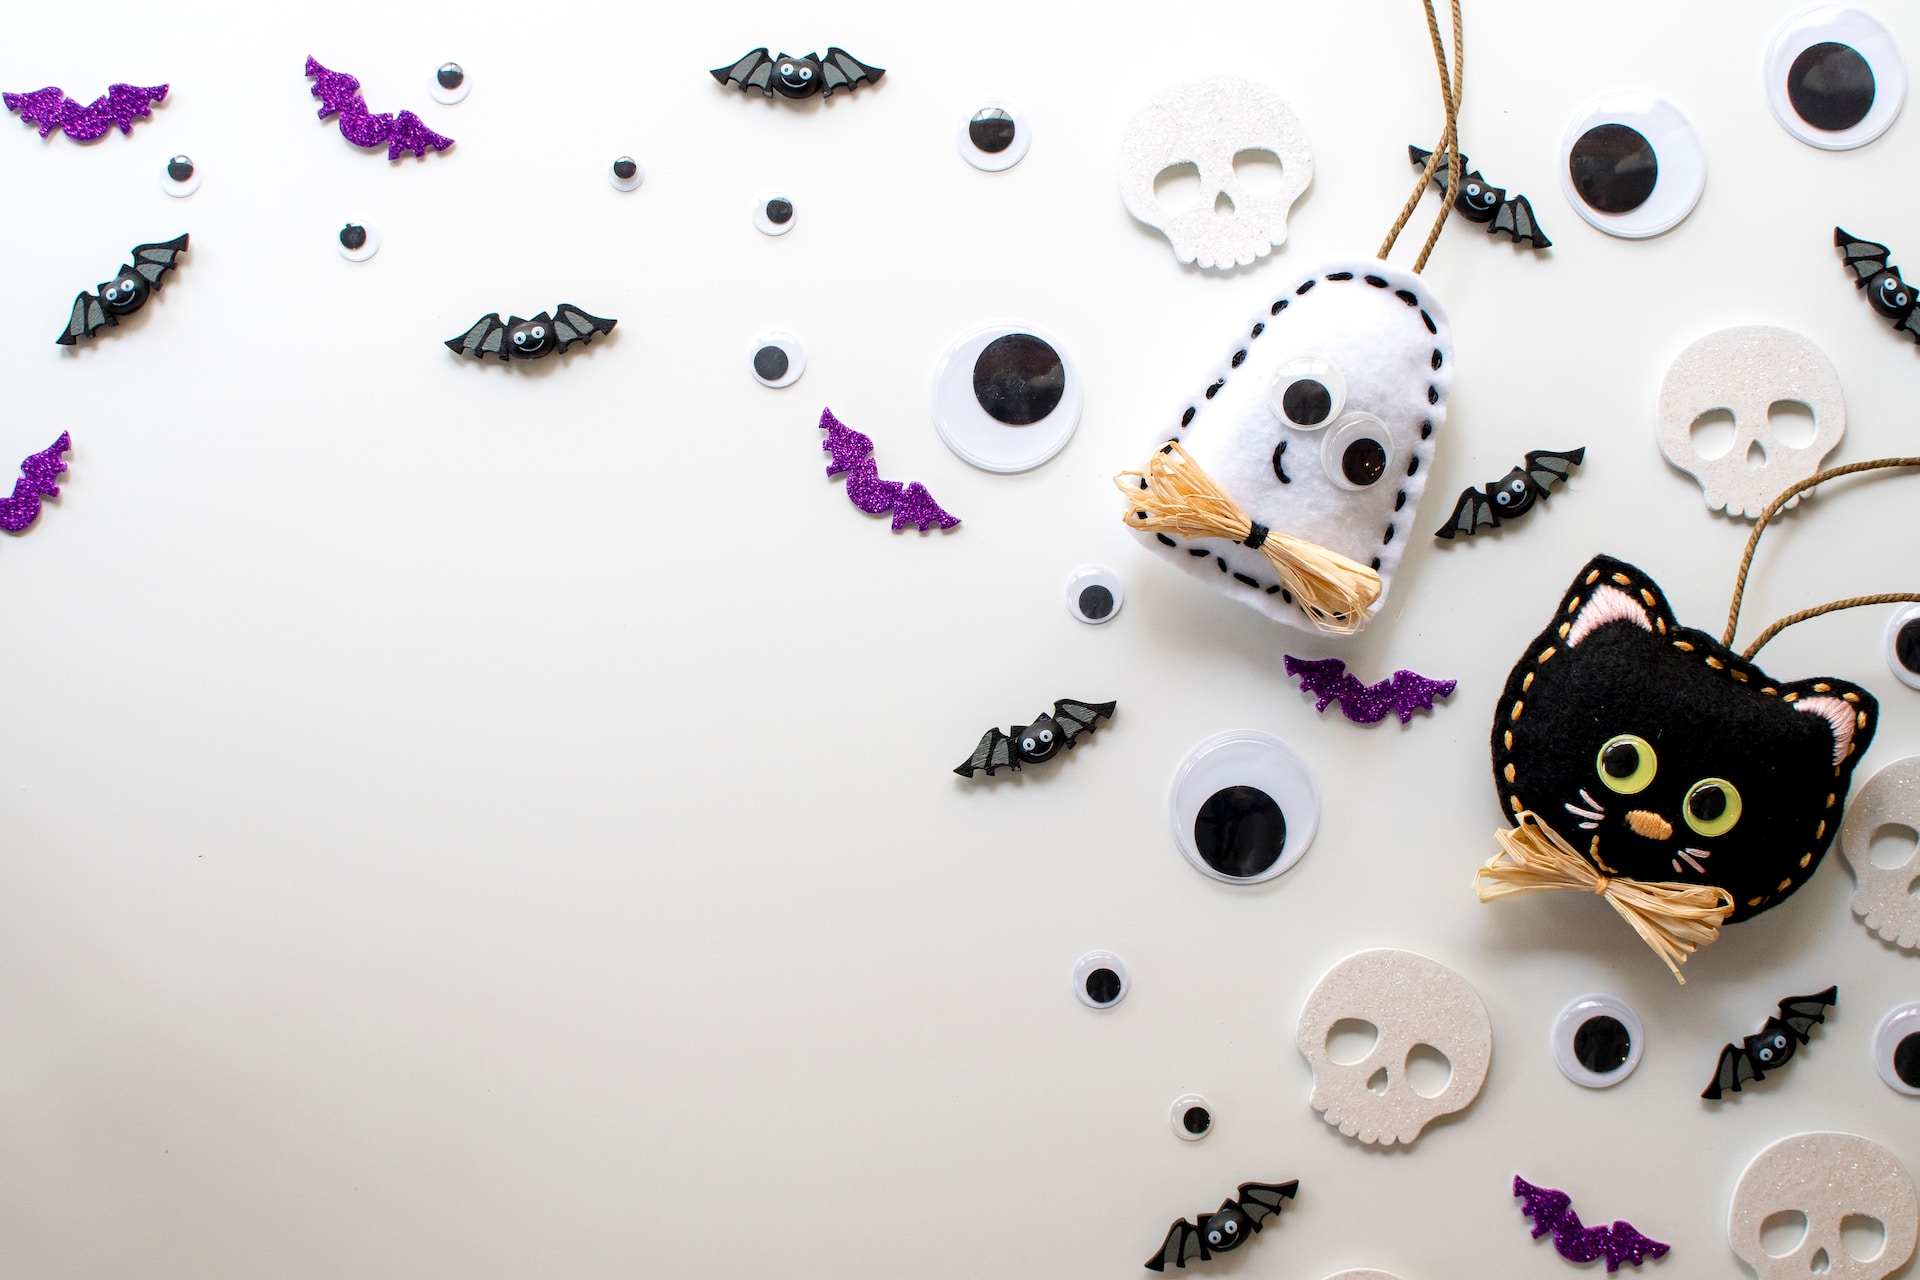 handmade Halloween decorations on a white background